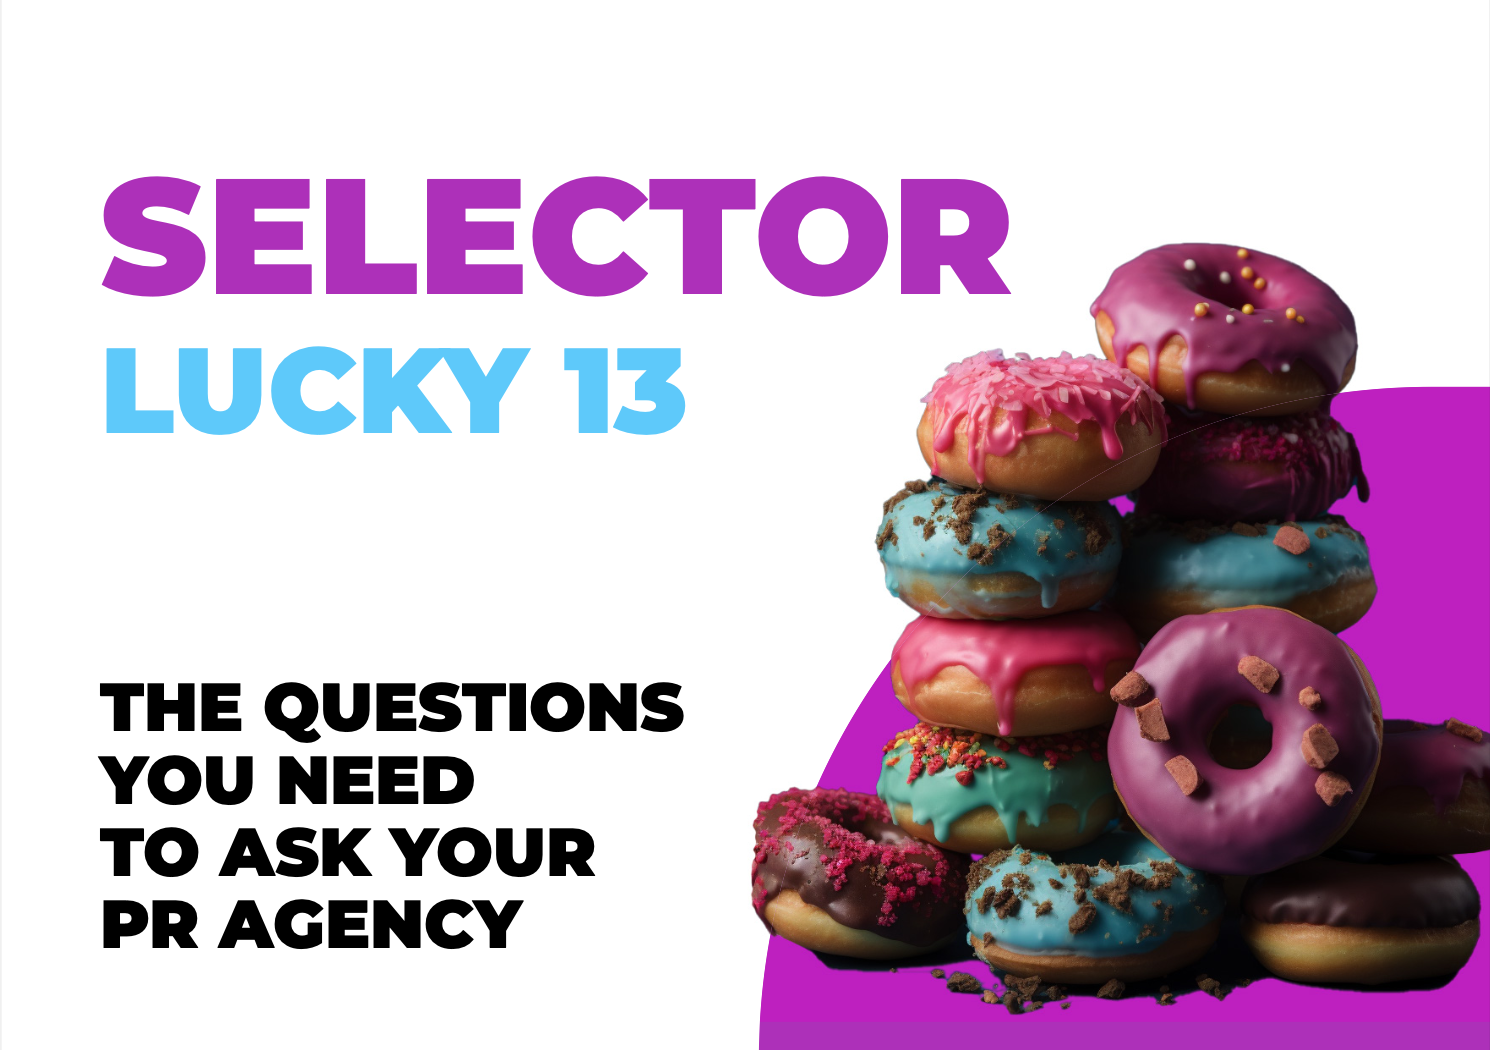 Selector Lucky 13 - The Questions You Need to Ask Your PR Agency